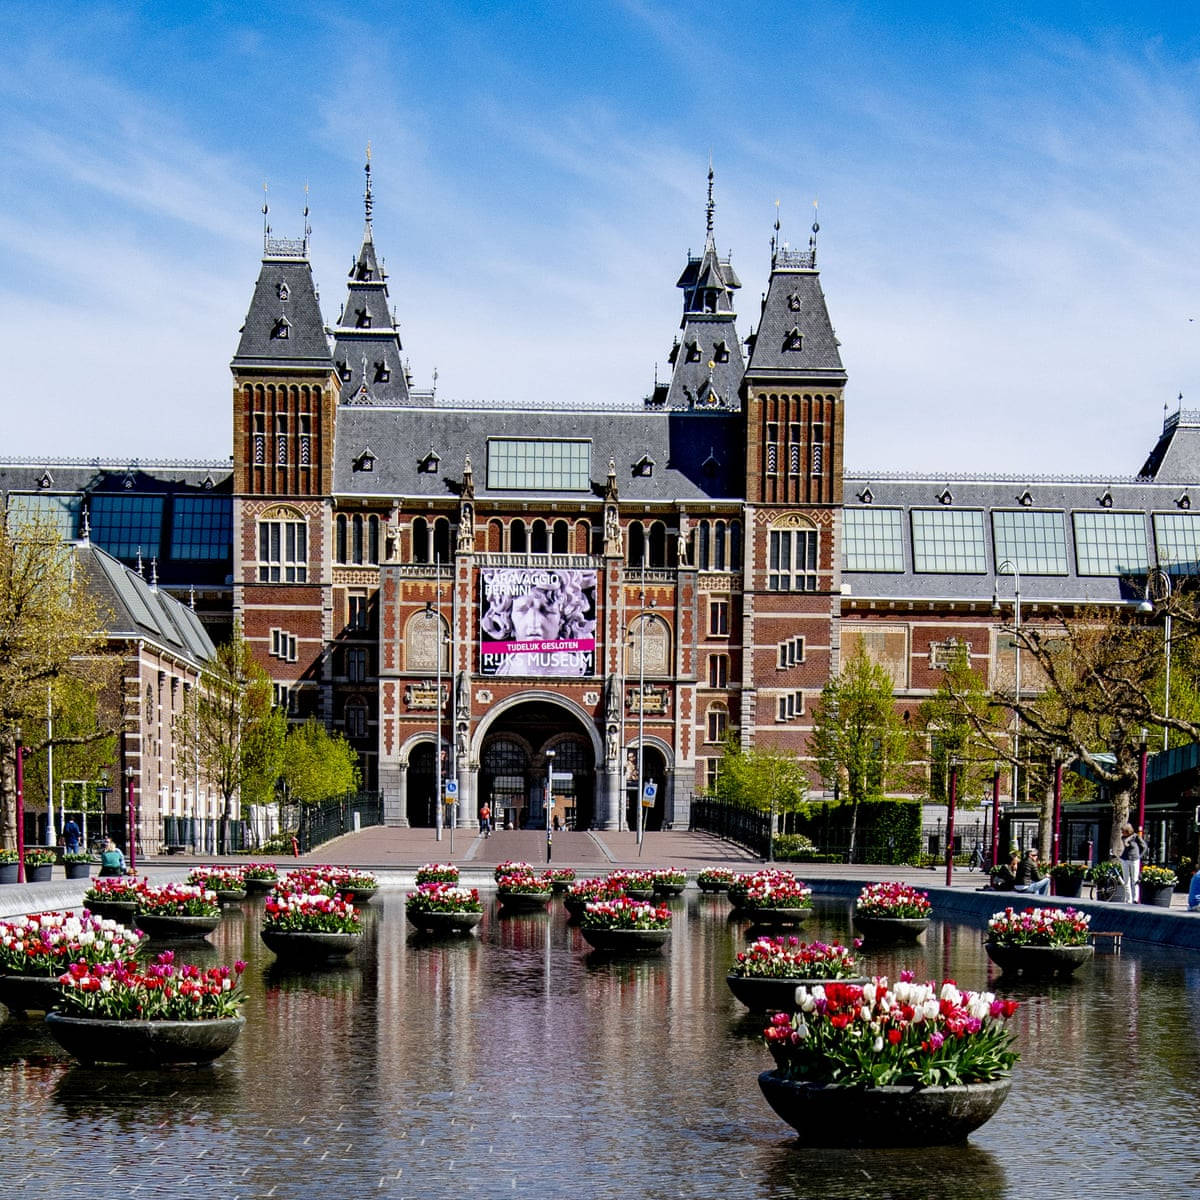 Rijksmuseum With Flowers In Pond Background